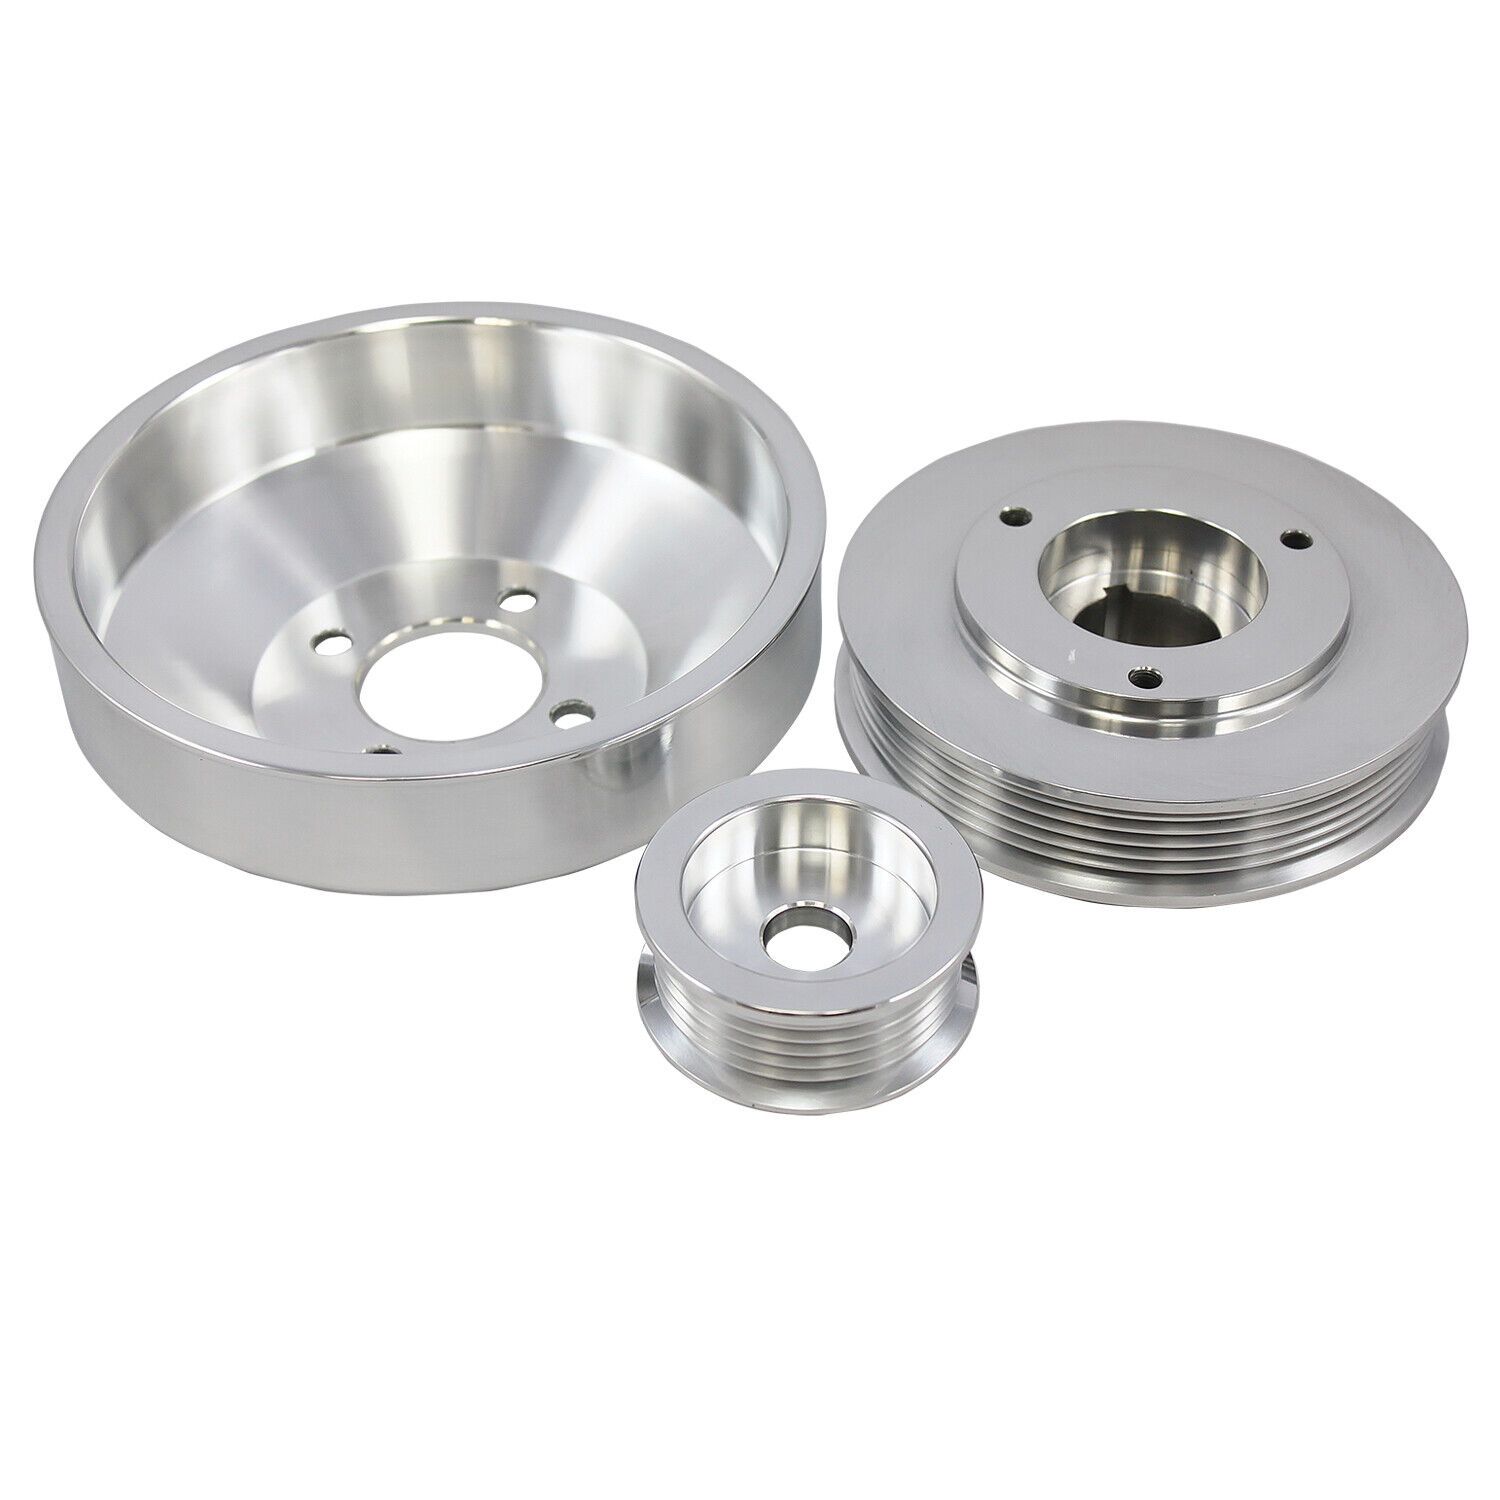 96-99 Ford Mustang GT / Cobra 4.6 3 PC Under Drive Pulley Set Polished Aluminum